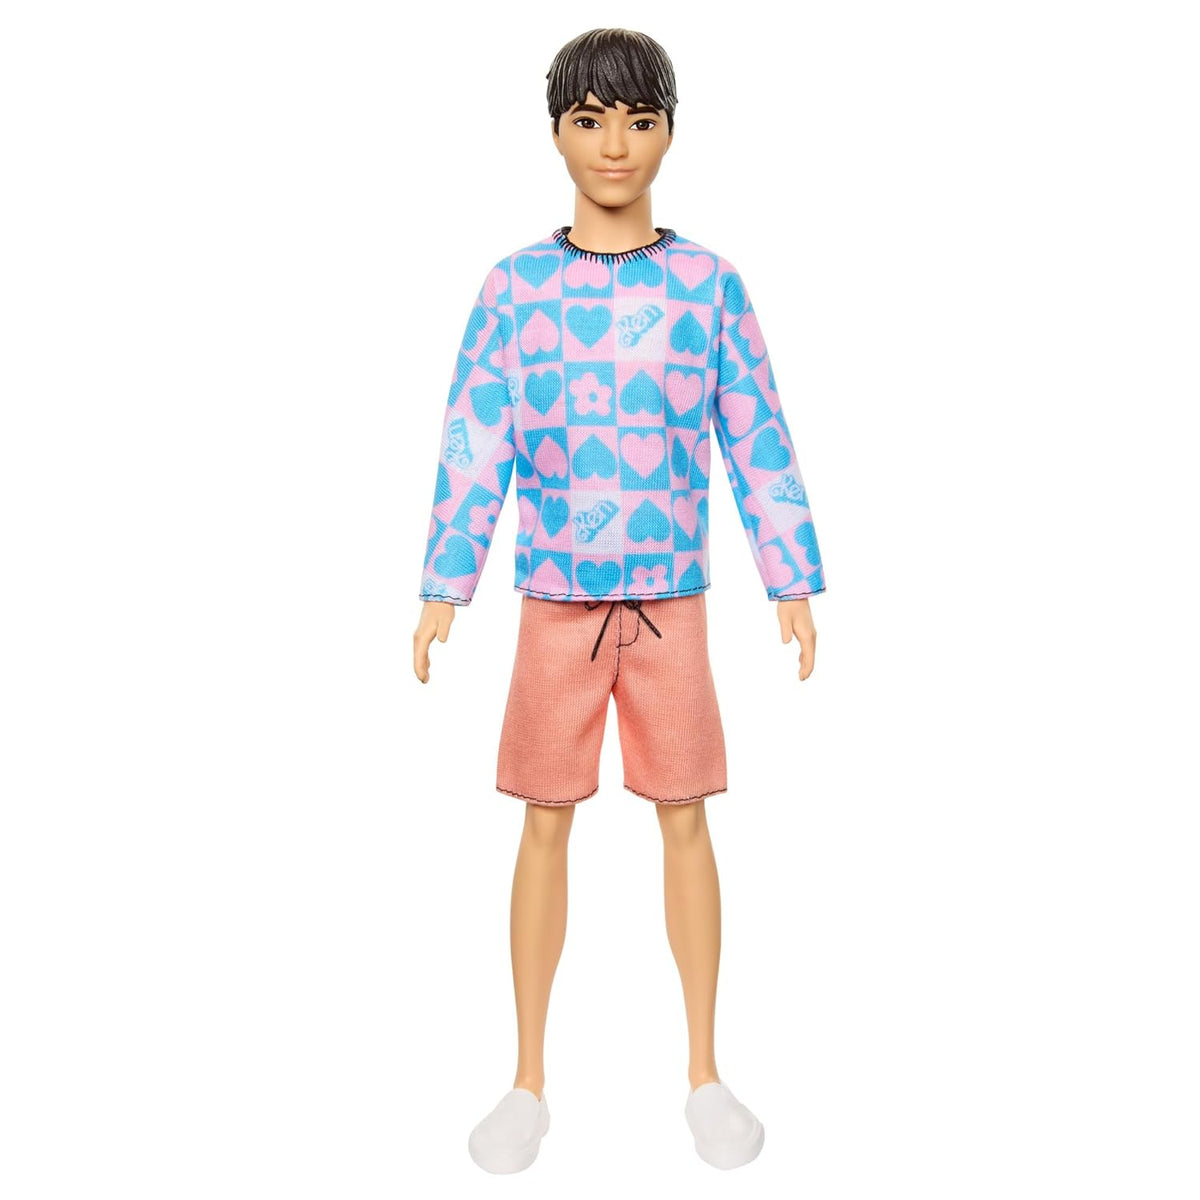 Barbie Fashionistas Ken Doll #219 with Slender Body Wearing a Removable Long-Sleeve Pink & Blue Patterned Shirt & Pink Shorts